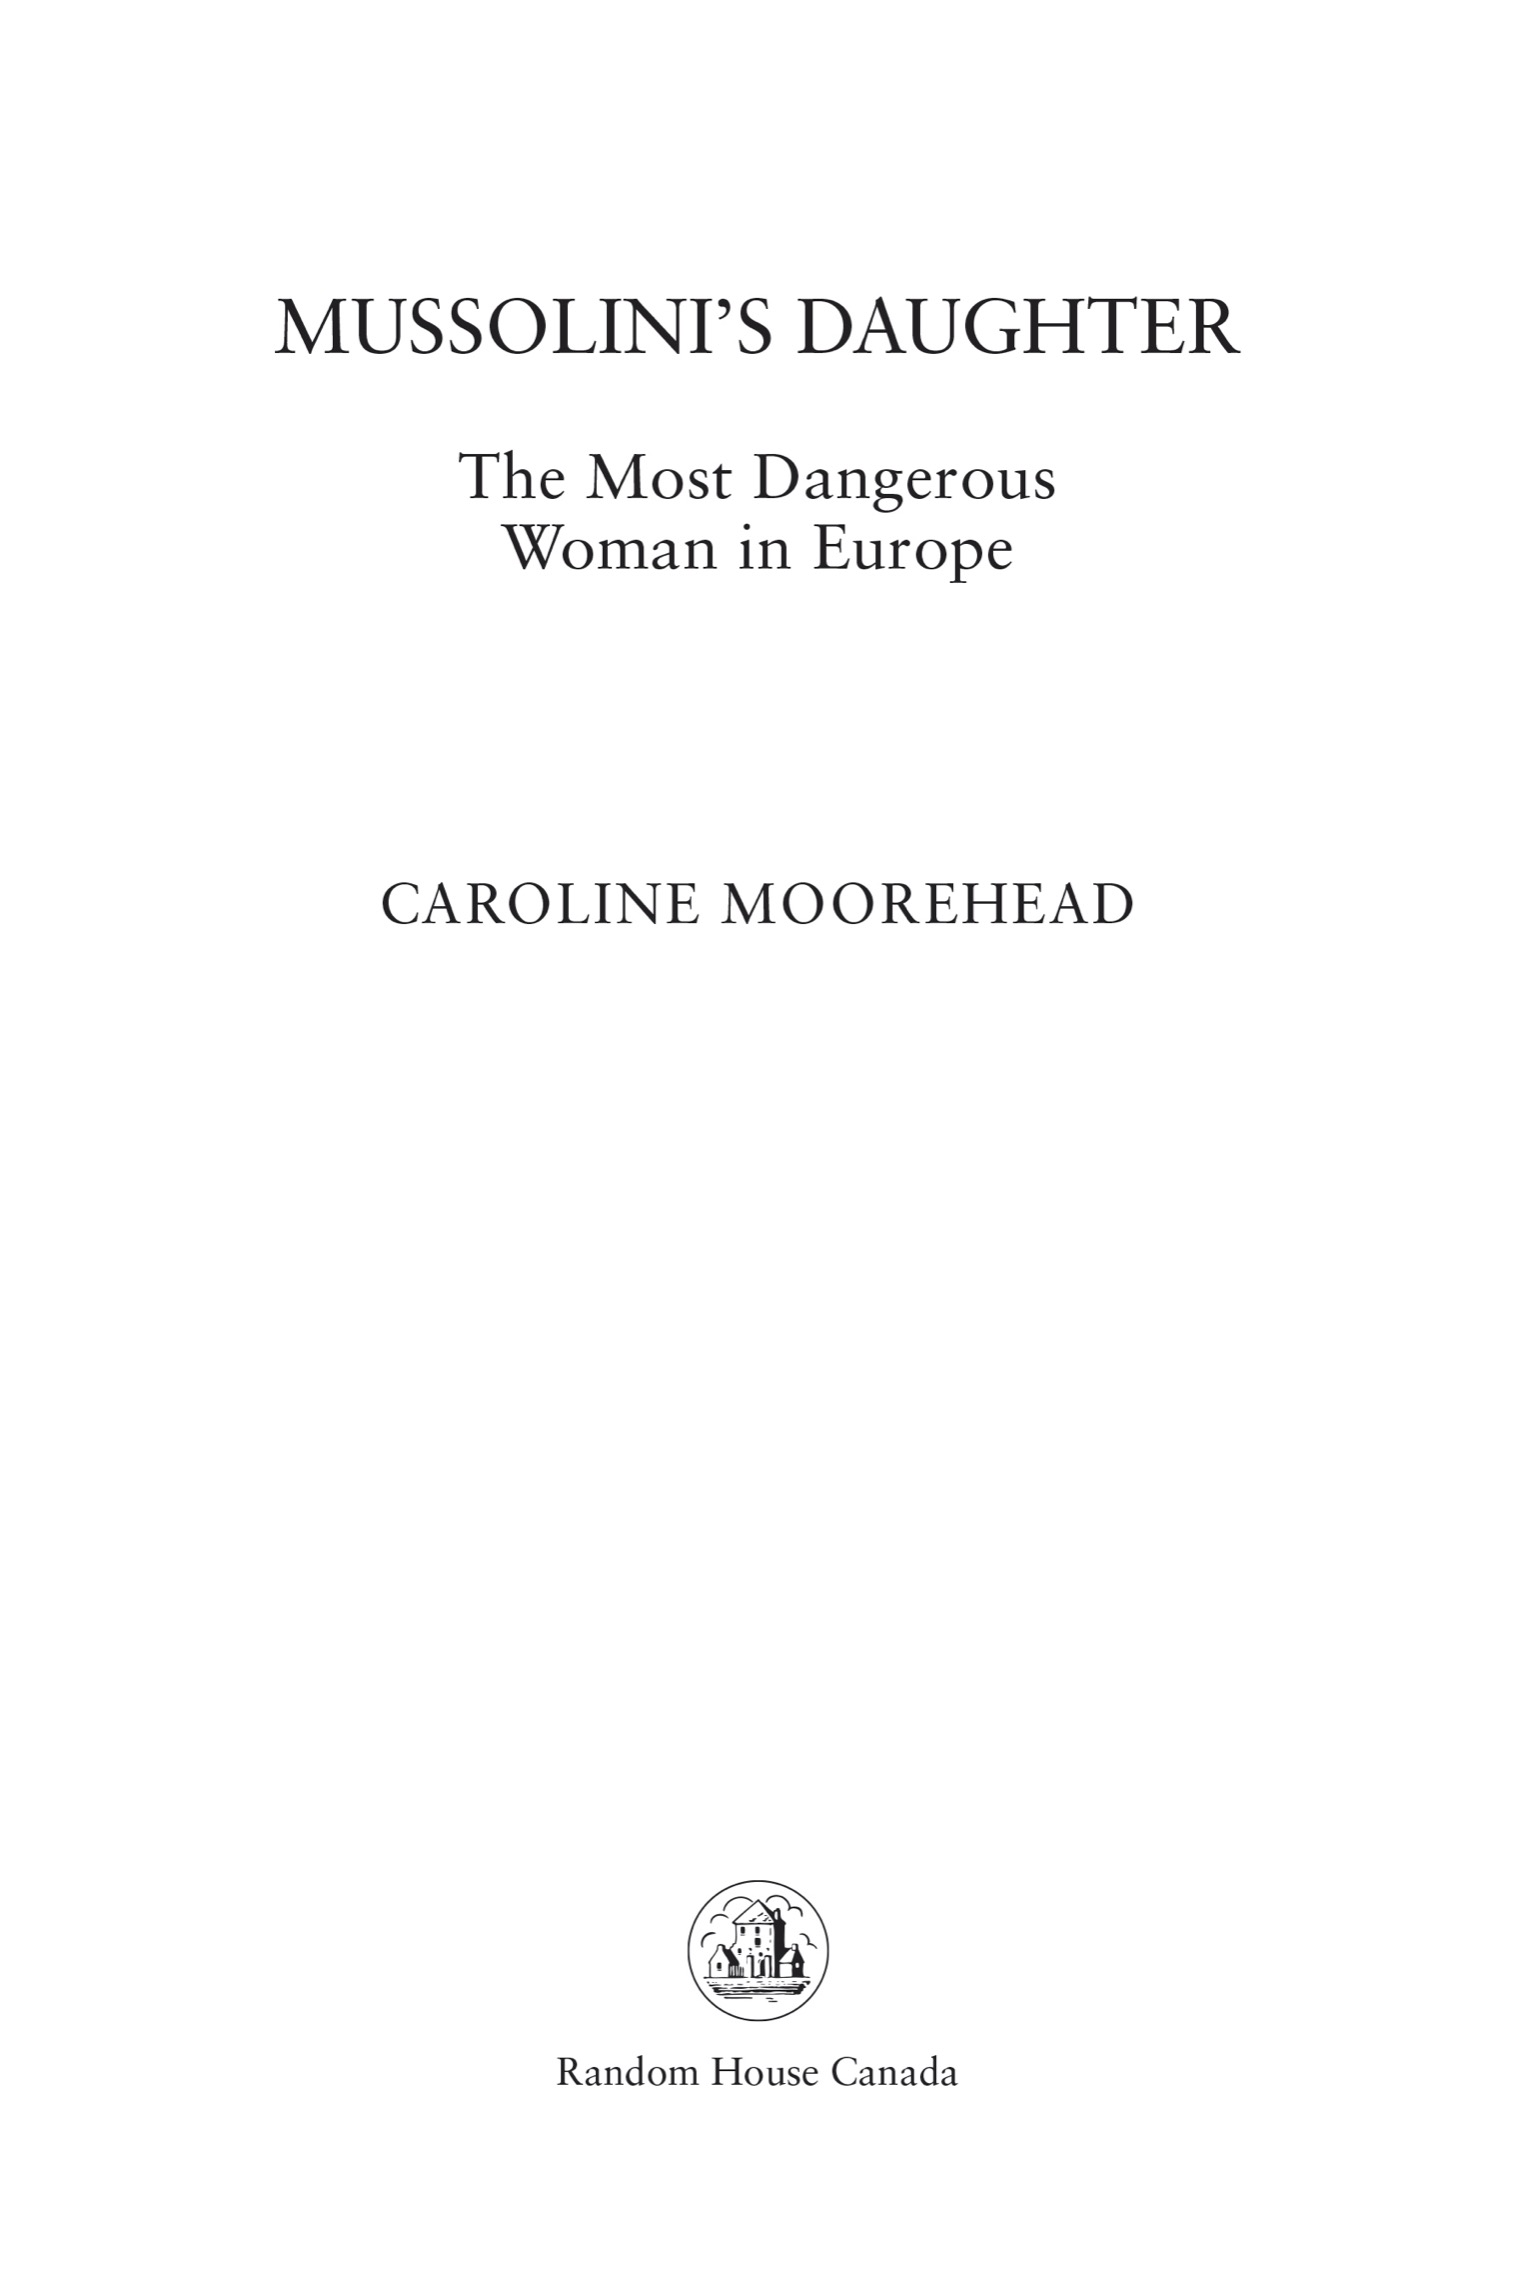 PUBLISHED BY RANDOM HOUSE CANADA Copyright 2022 Caroline Moorehead All rights - photo 2